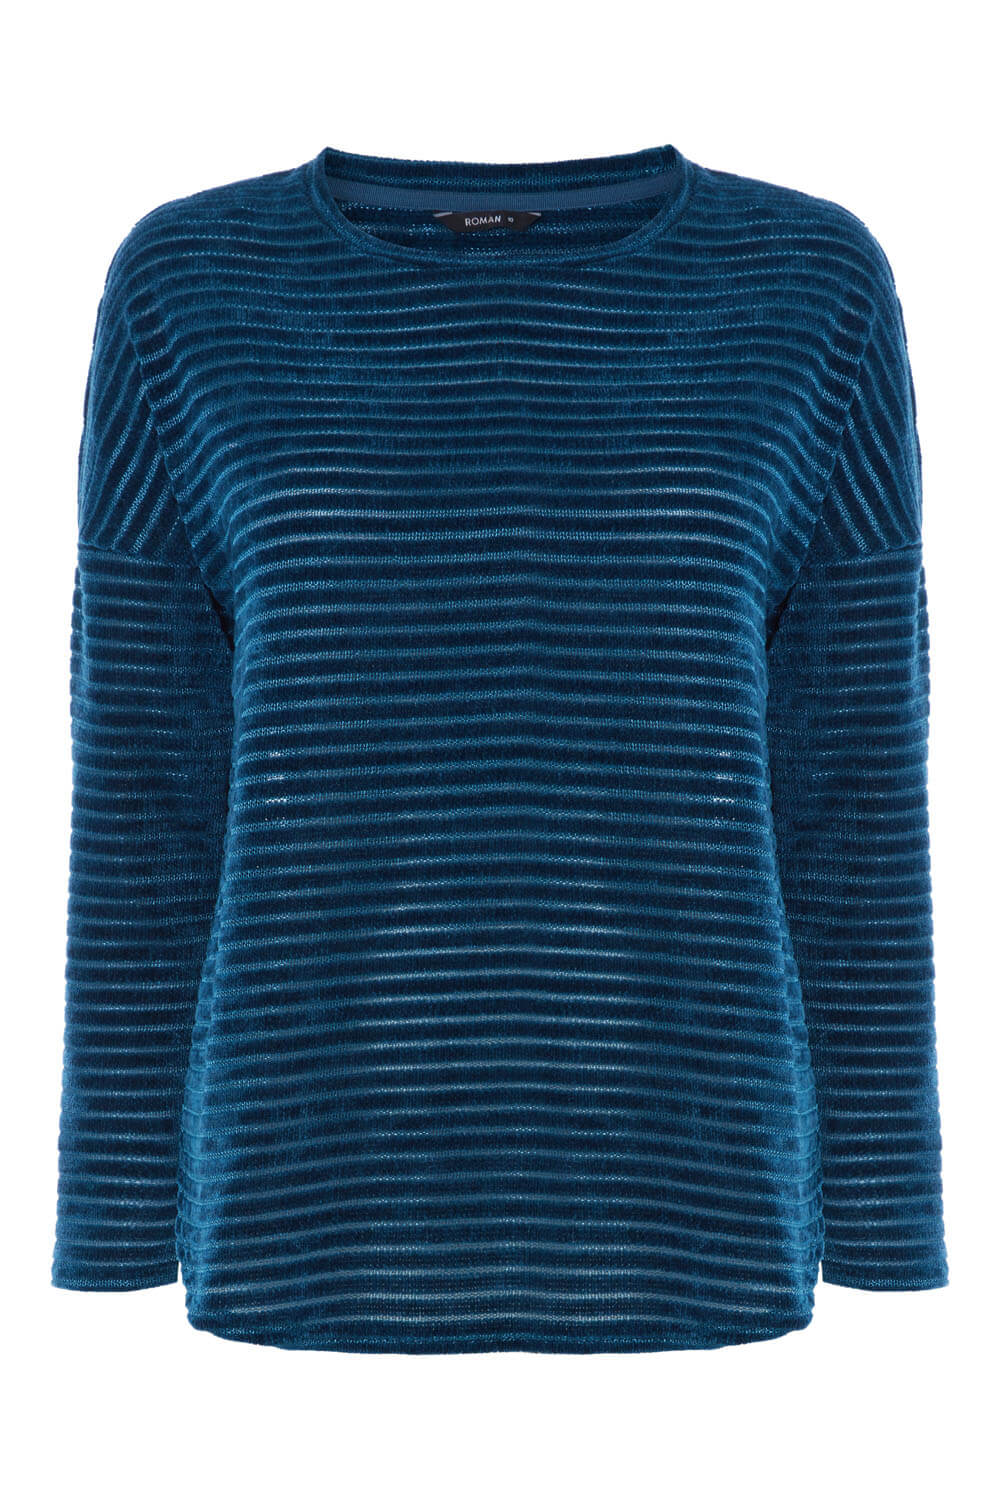 Teal Chenille Stripe Long Sleeve Top, Image 5 of 5